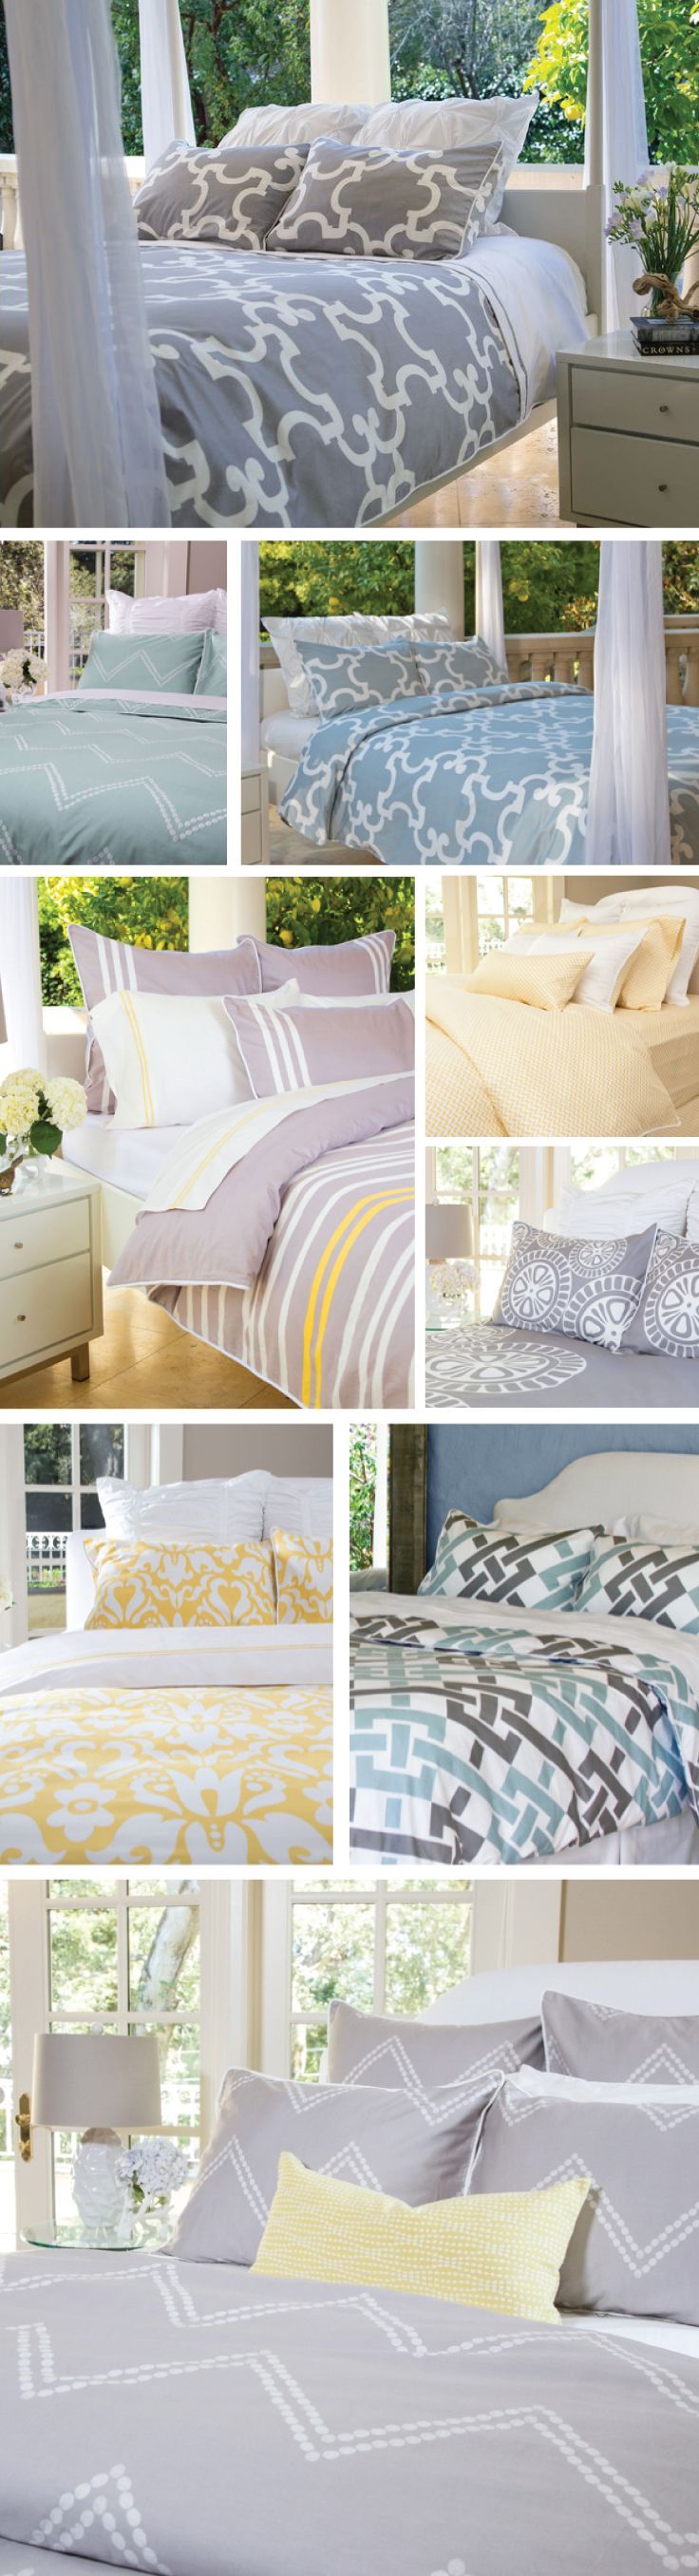 Discover beautiful bedding from Crane & Canopy — from silky-smooth duvet covers, luxury sheet sets, beautiful quilts and